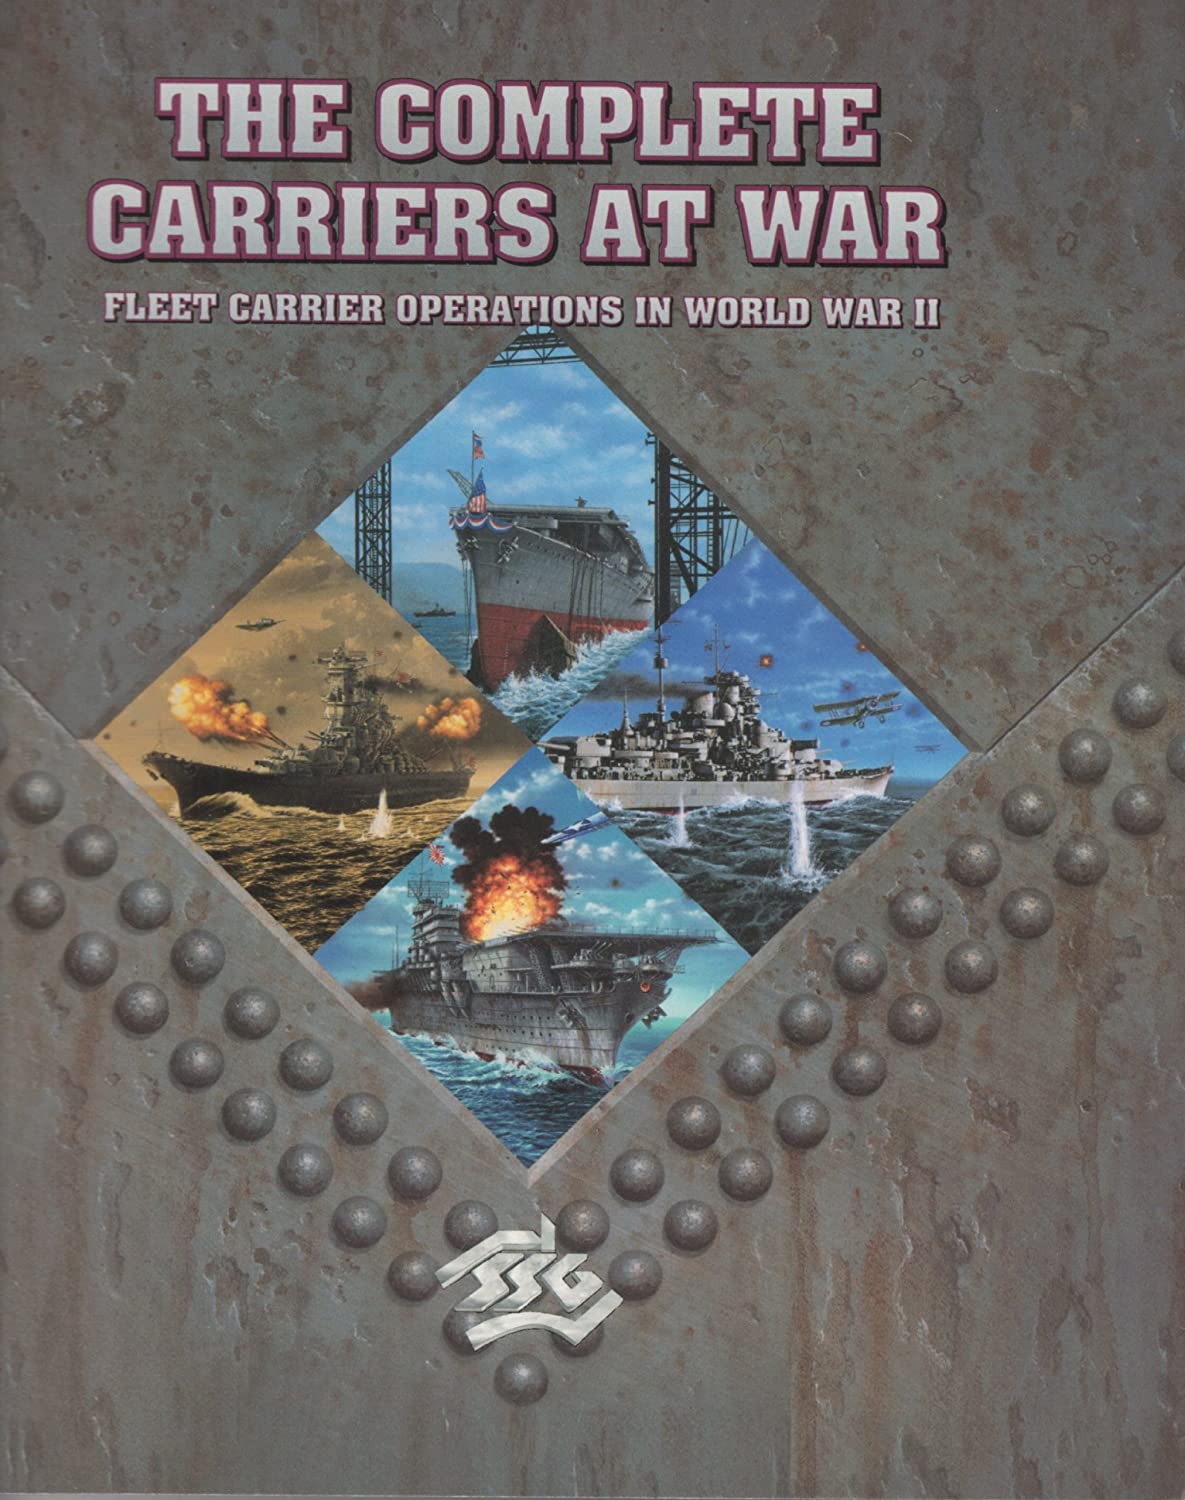 Carriers at War II player count stats